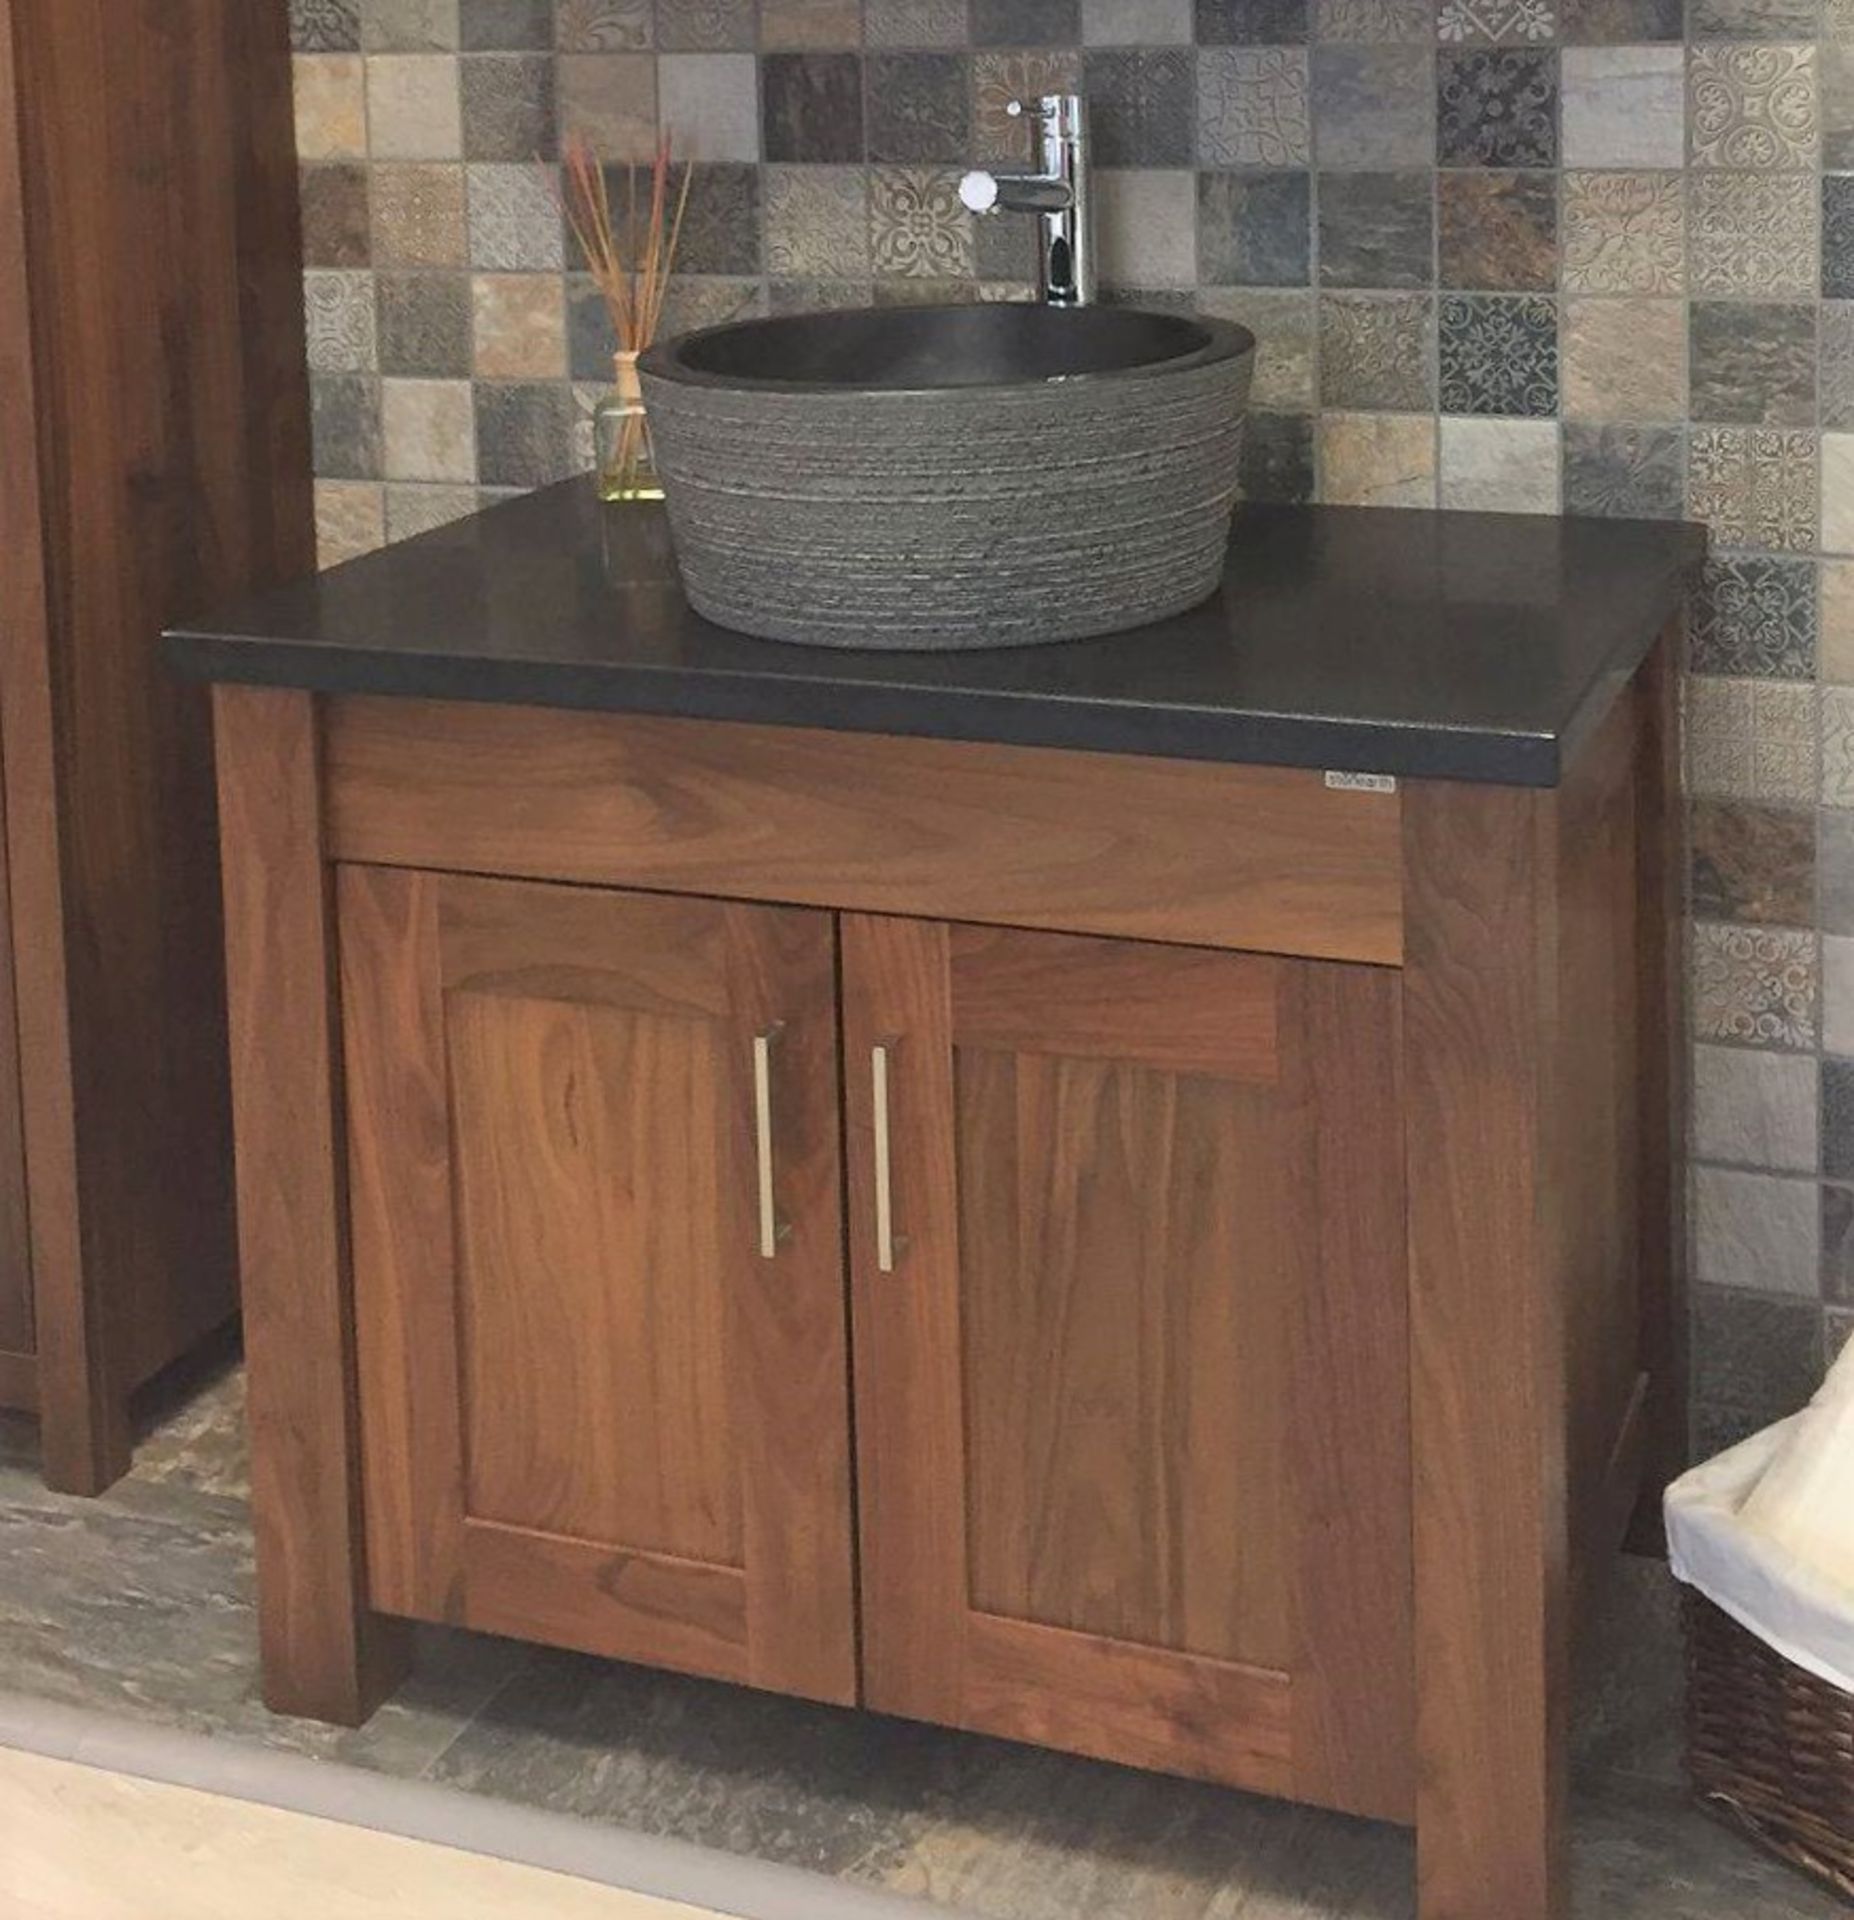 1 x Stonearth 'Finesse' Countertop Washstand - American Solid Walnut - Original RRP £1,400 - Image 4 of 10